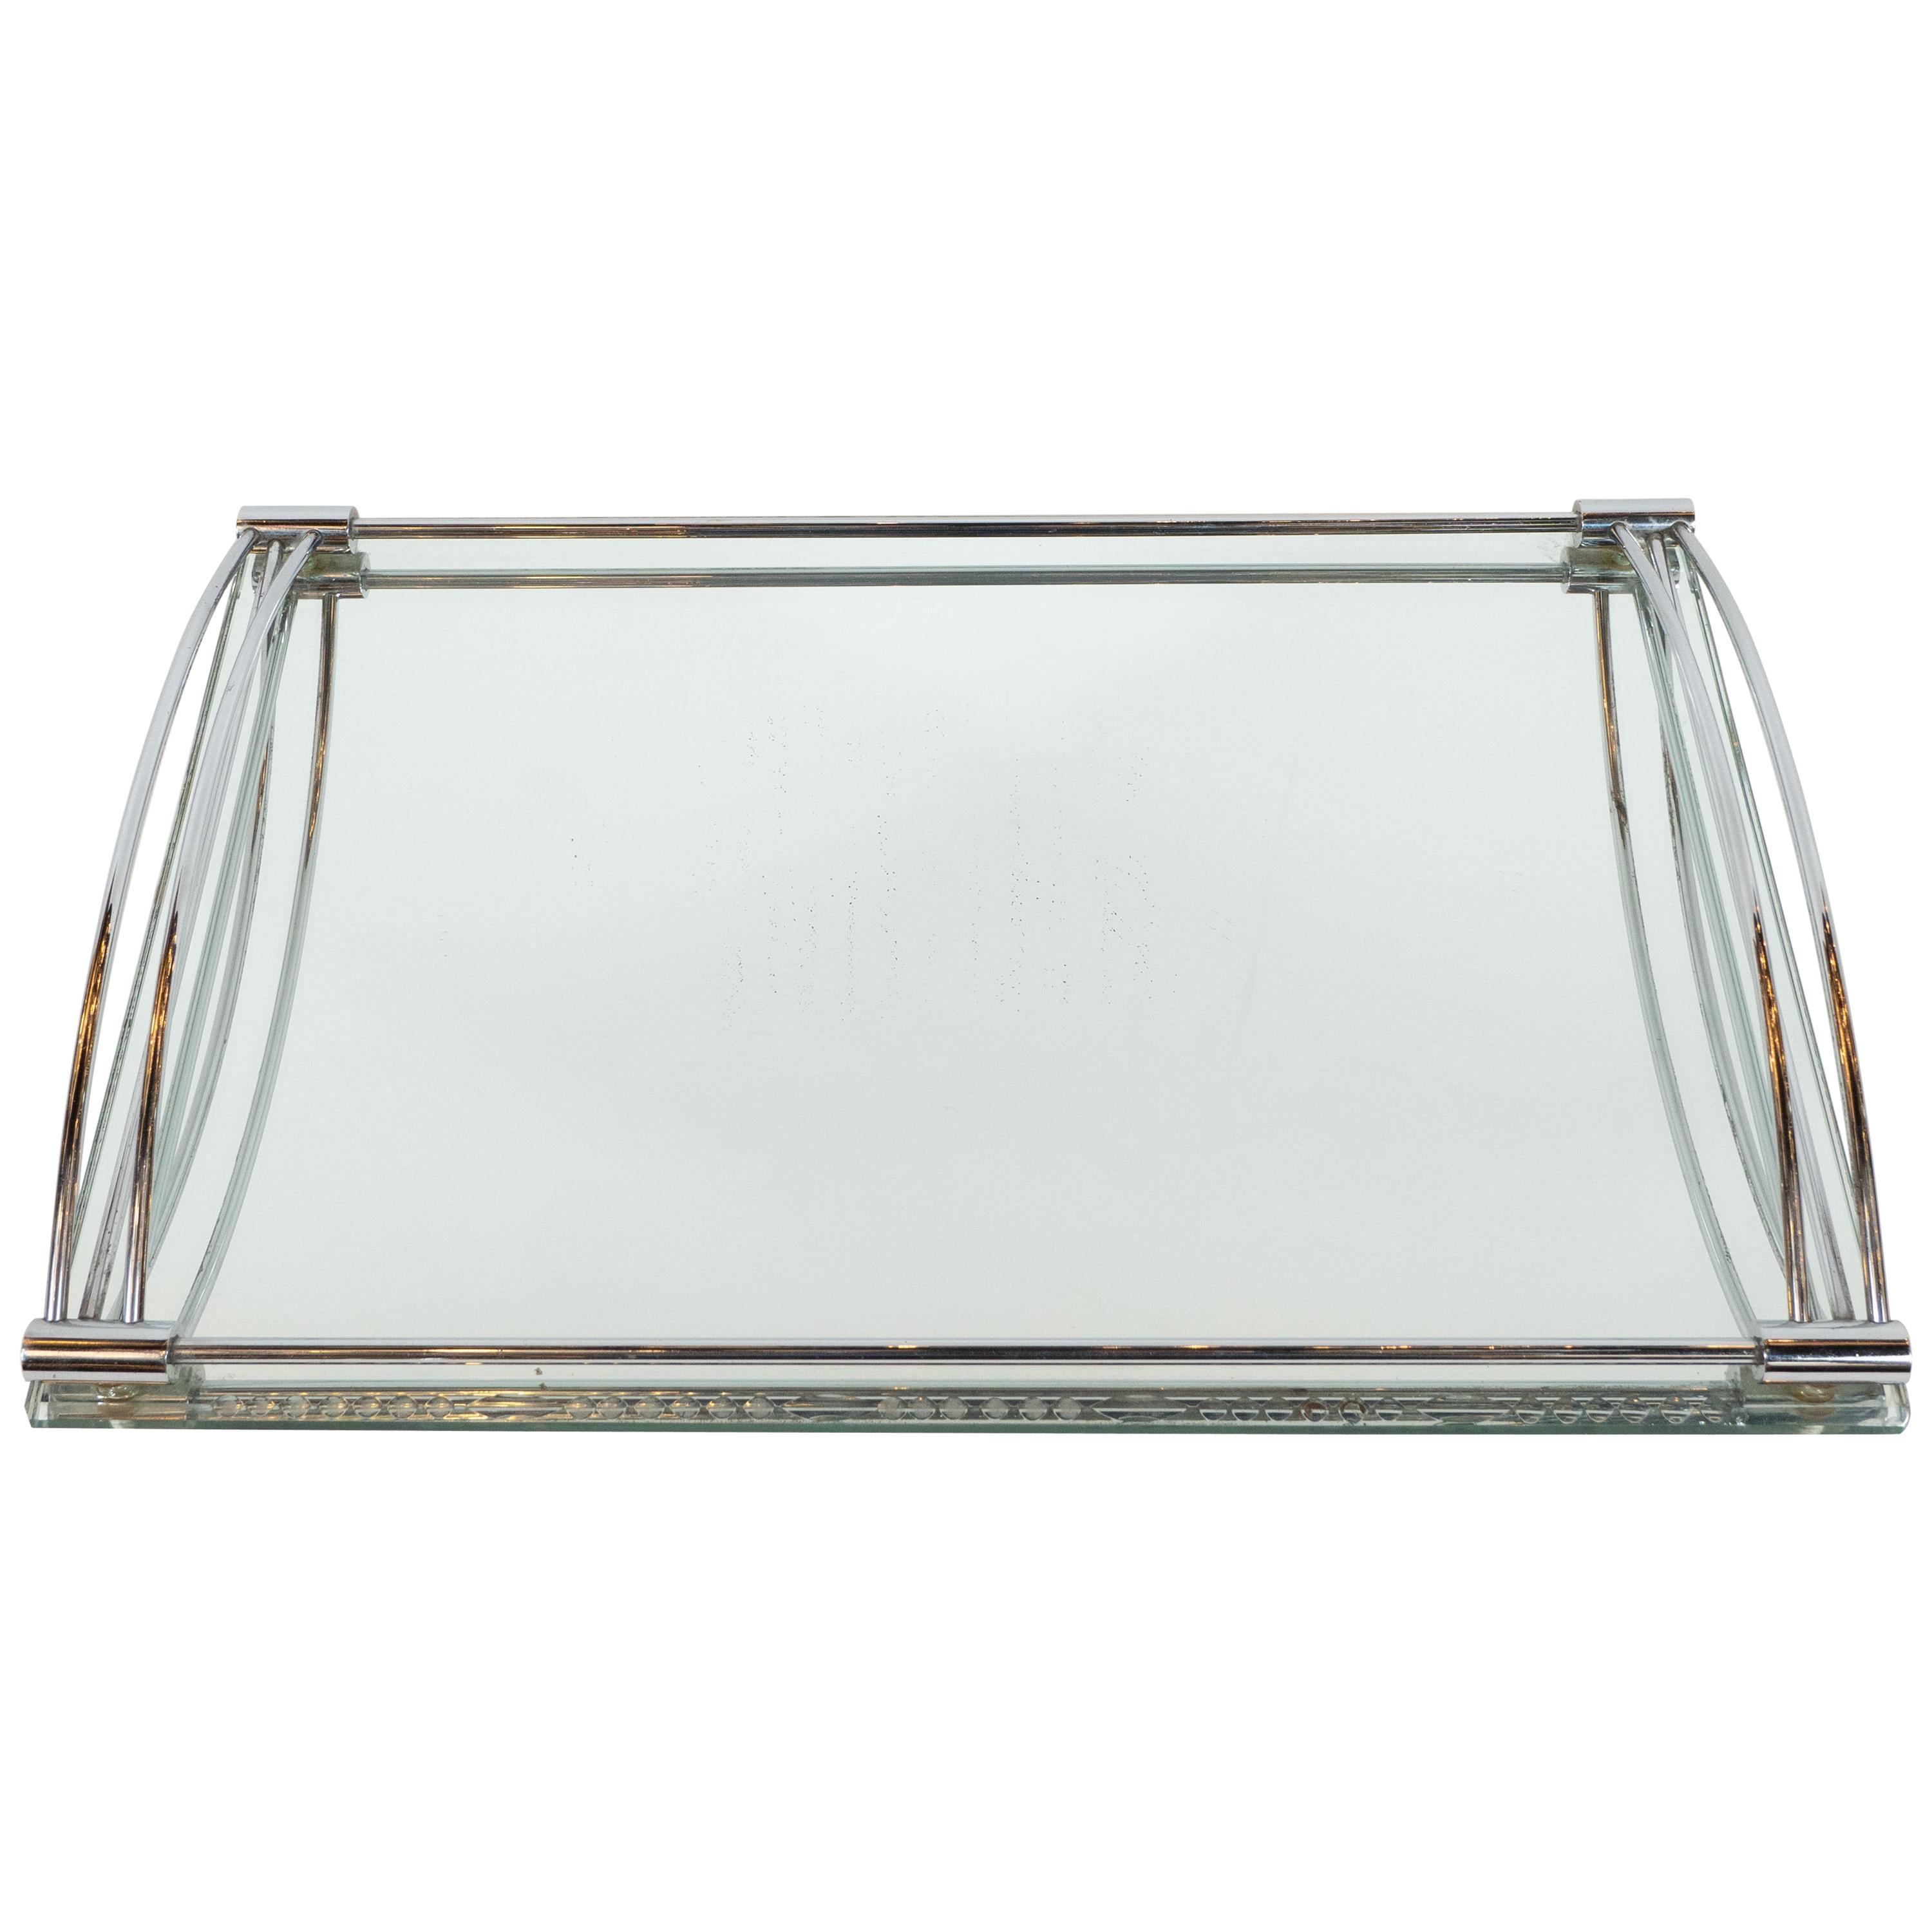 French Art Deco Streamlined Chrome and Chain Beveled Mirror Bar Tray